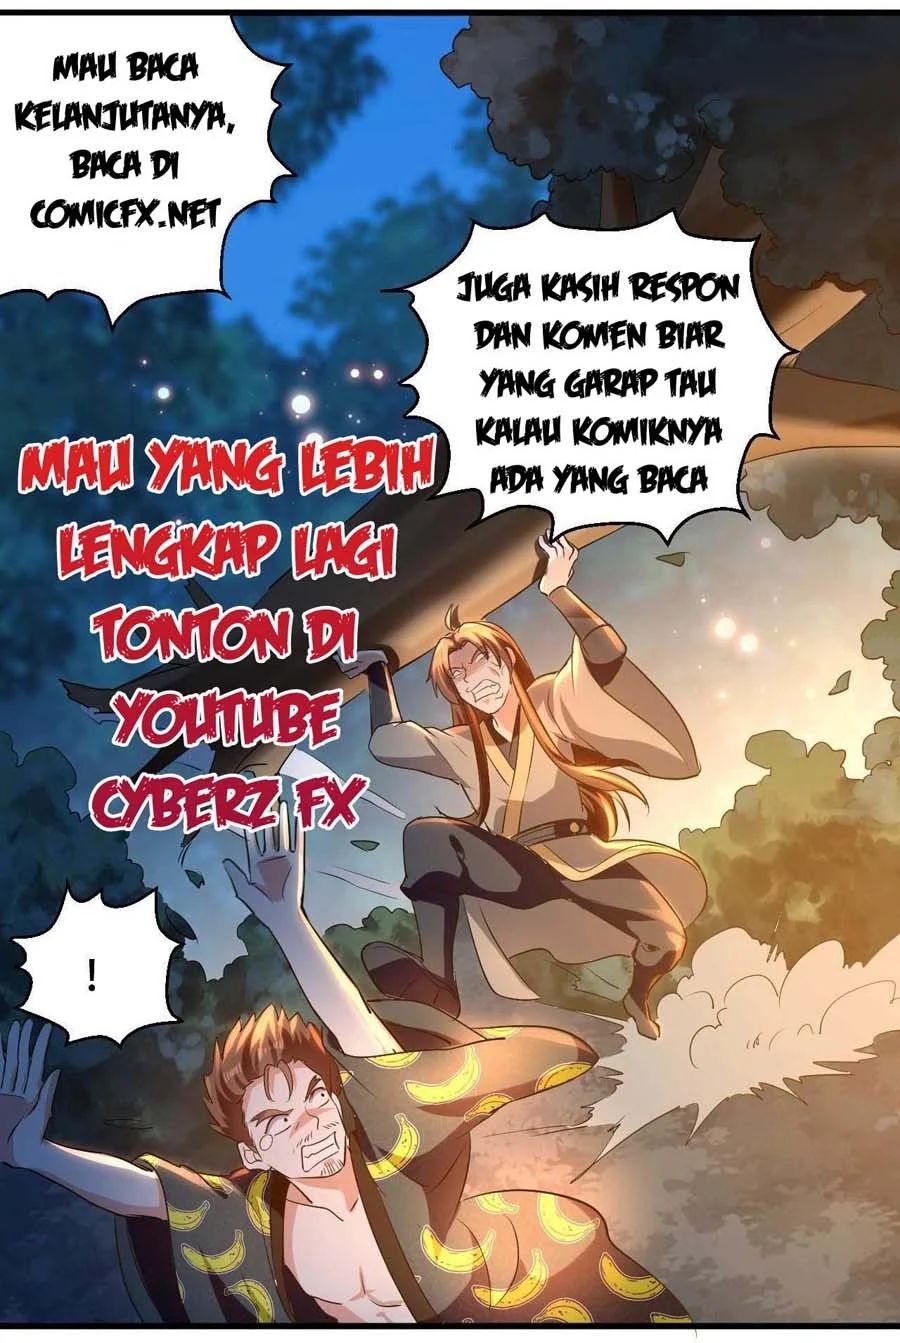 The Nine Heaven Of Martial Arts Chapter 124